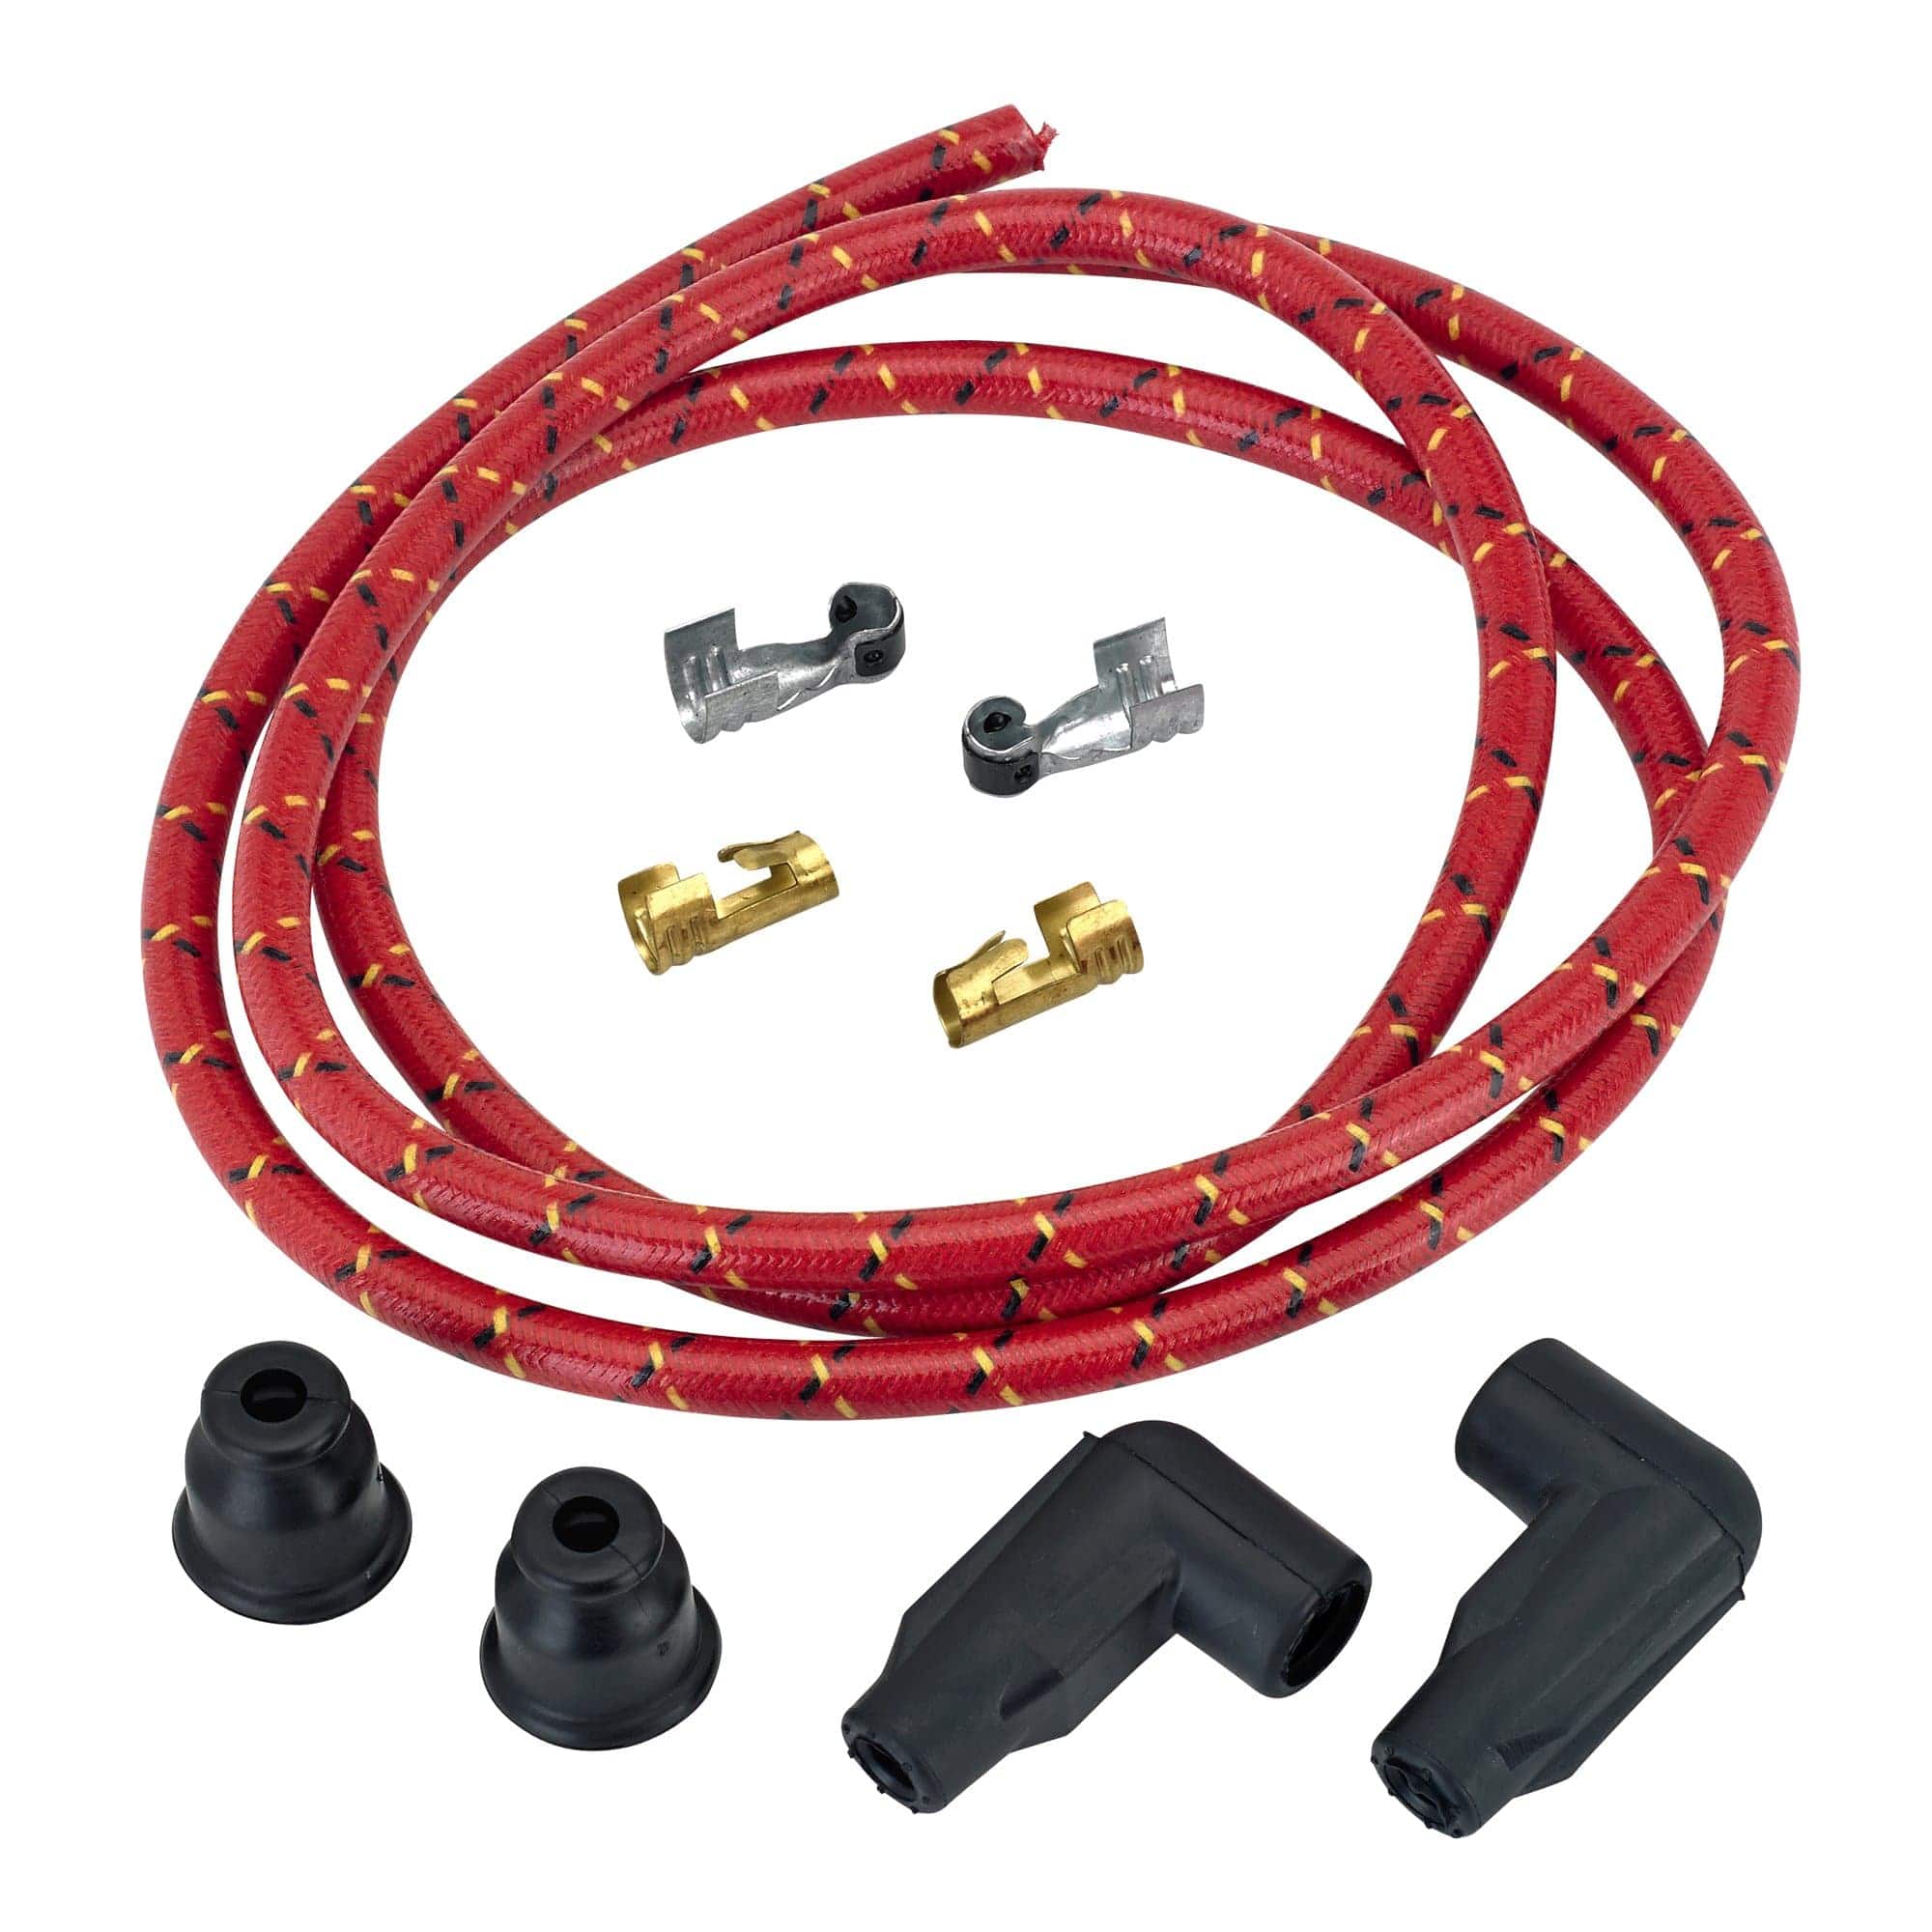 Lowbrow Customs 8mm Cloth 90 Degree Spark Plug Wire Sets - Red